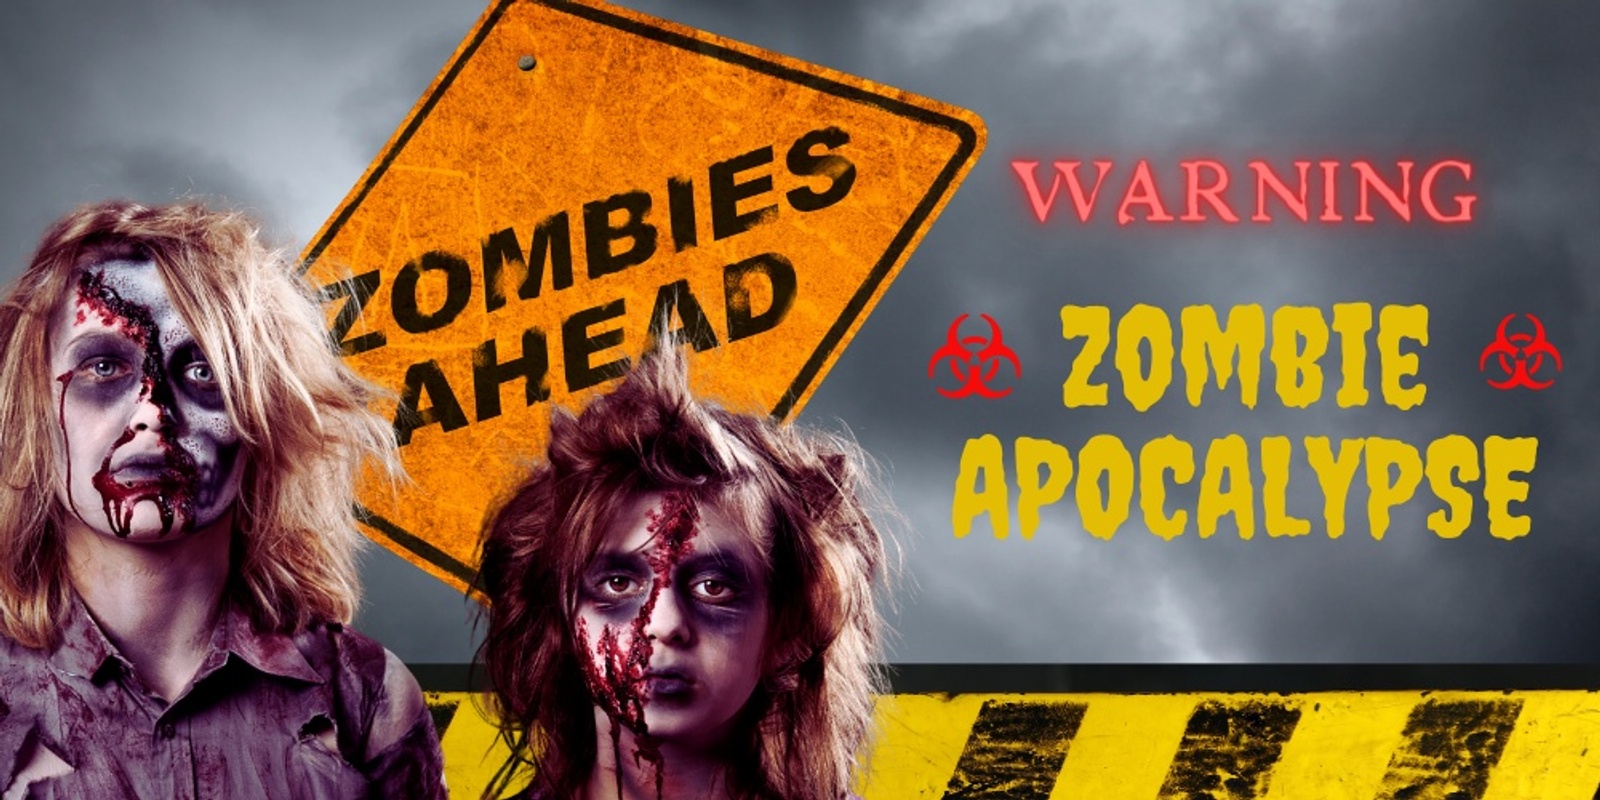 Banner image for Adult - Zombie Apocalypse and Movie Trailer  - SPRING HILL